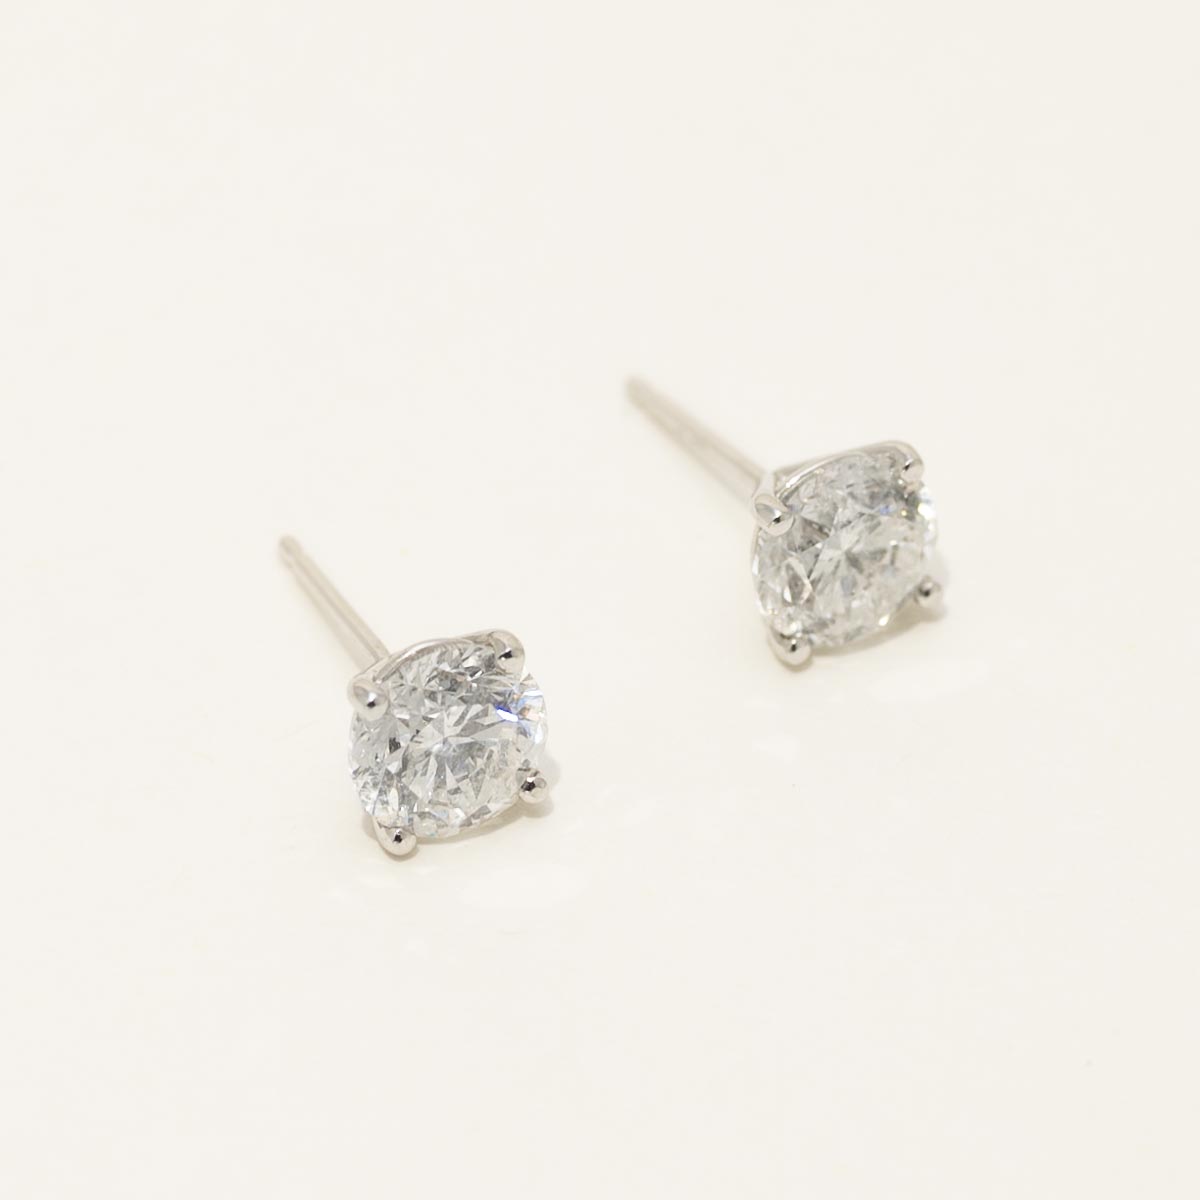 Diamond Martini Style Stud Earrings in 14kt White Gold (2 1/2ct tw)